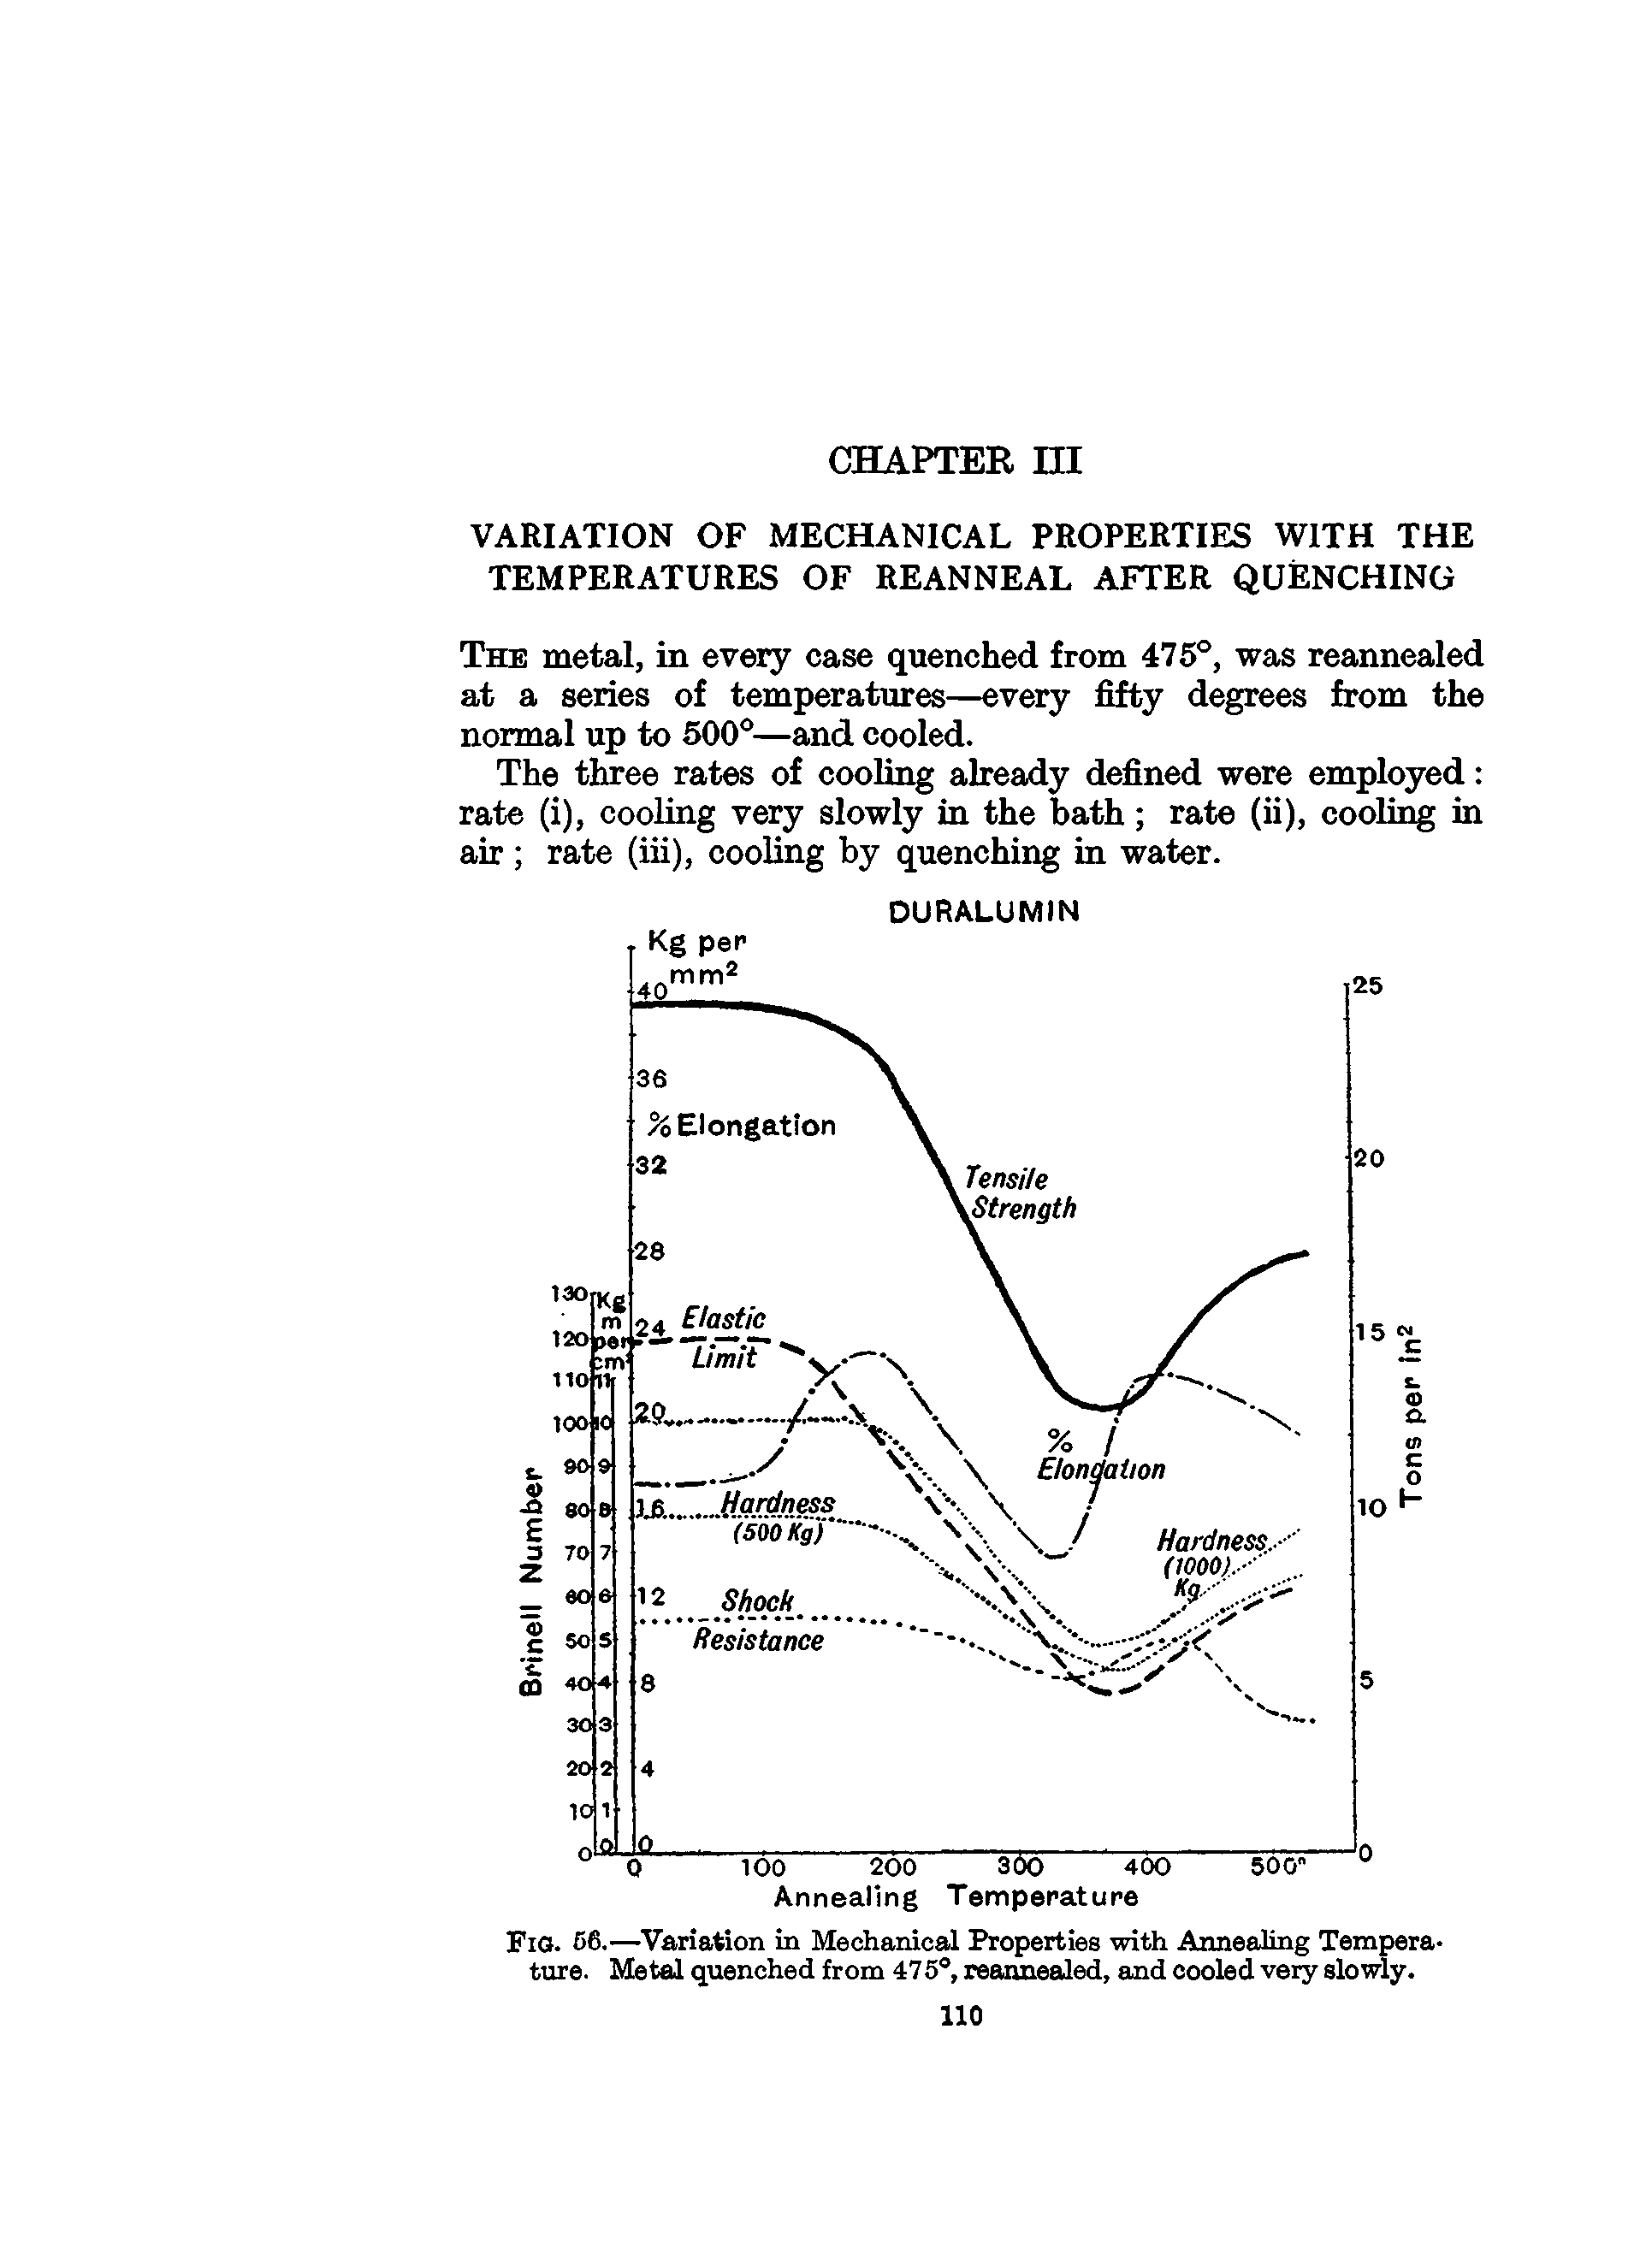 Fig. 56.—Variation in Mechanical Properties with Annealing Temperature. Metal quenched from 475°, reannealed, and cooled very slowly.